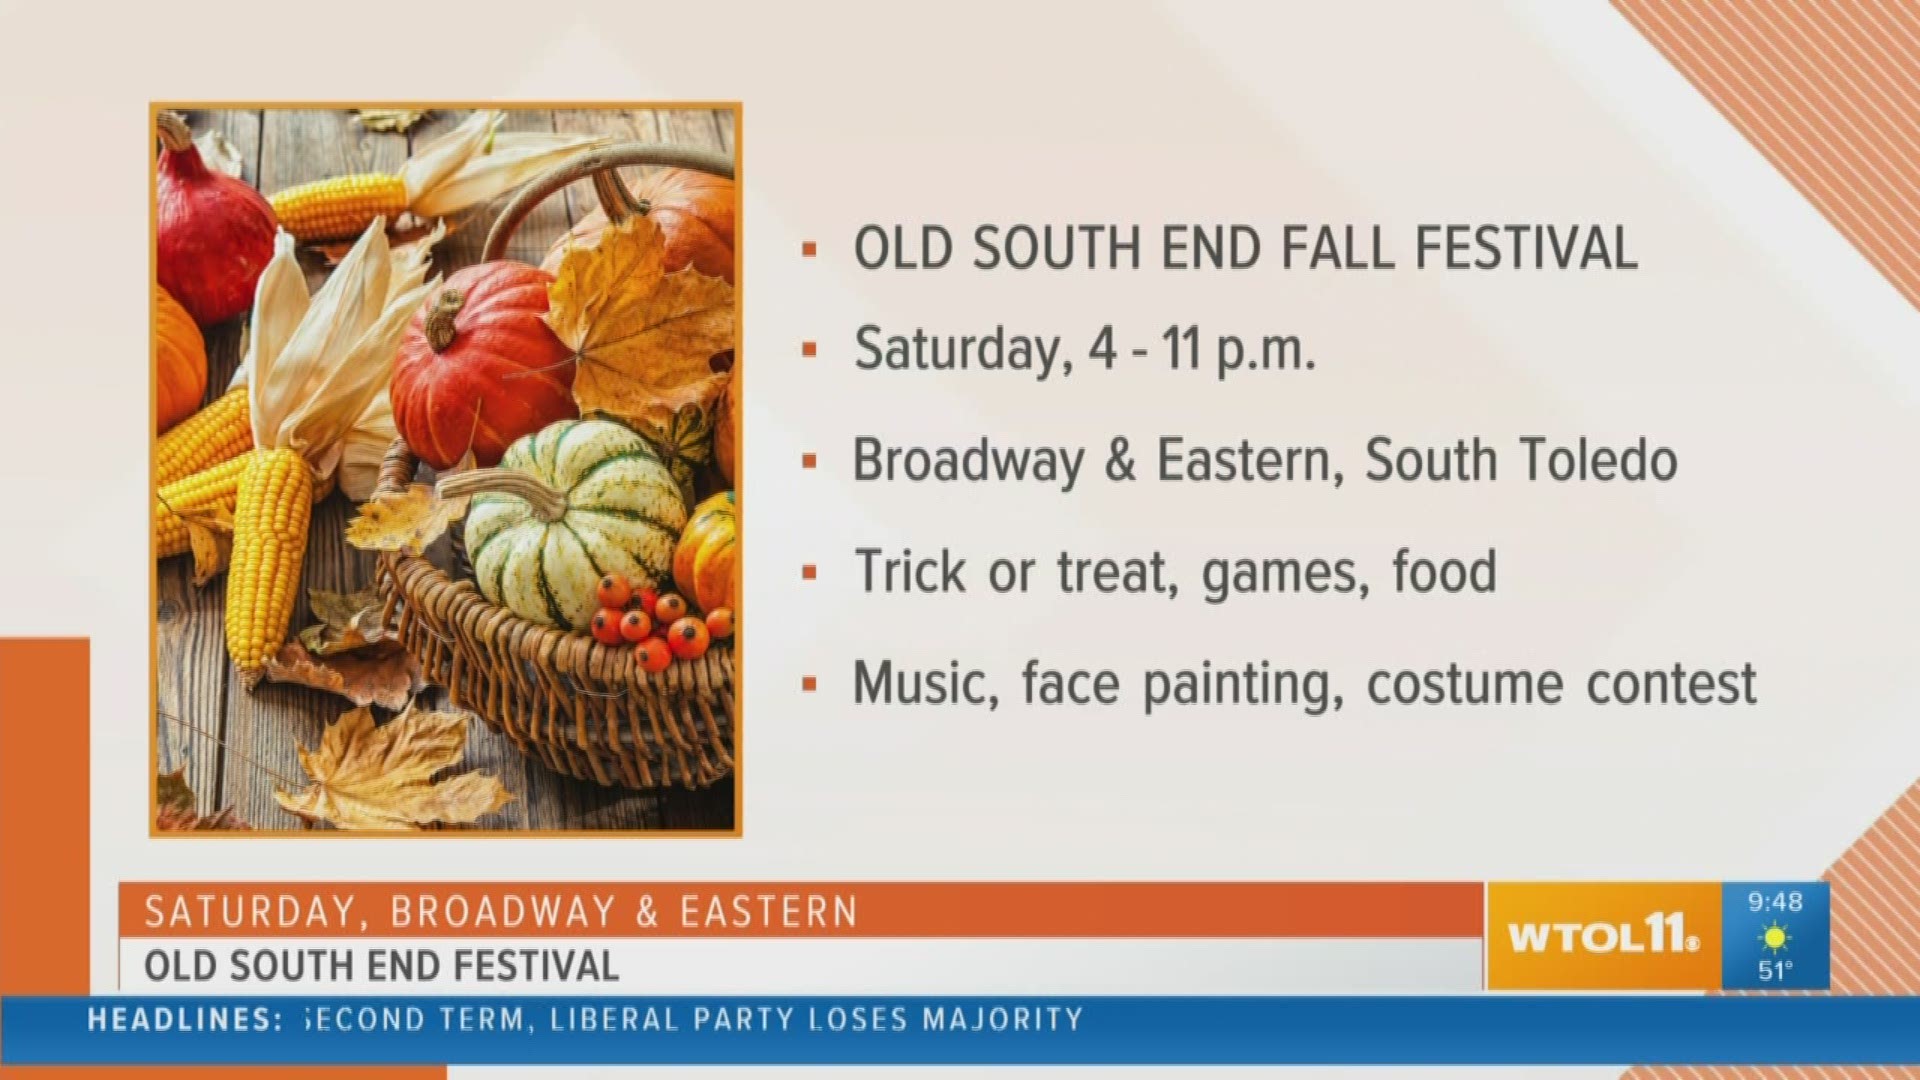 This is a big October weekend for Toledo - it's the Old South End Fall Festival!